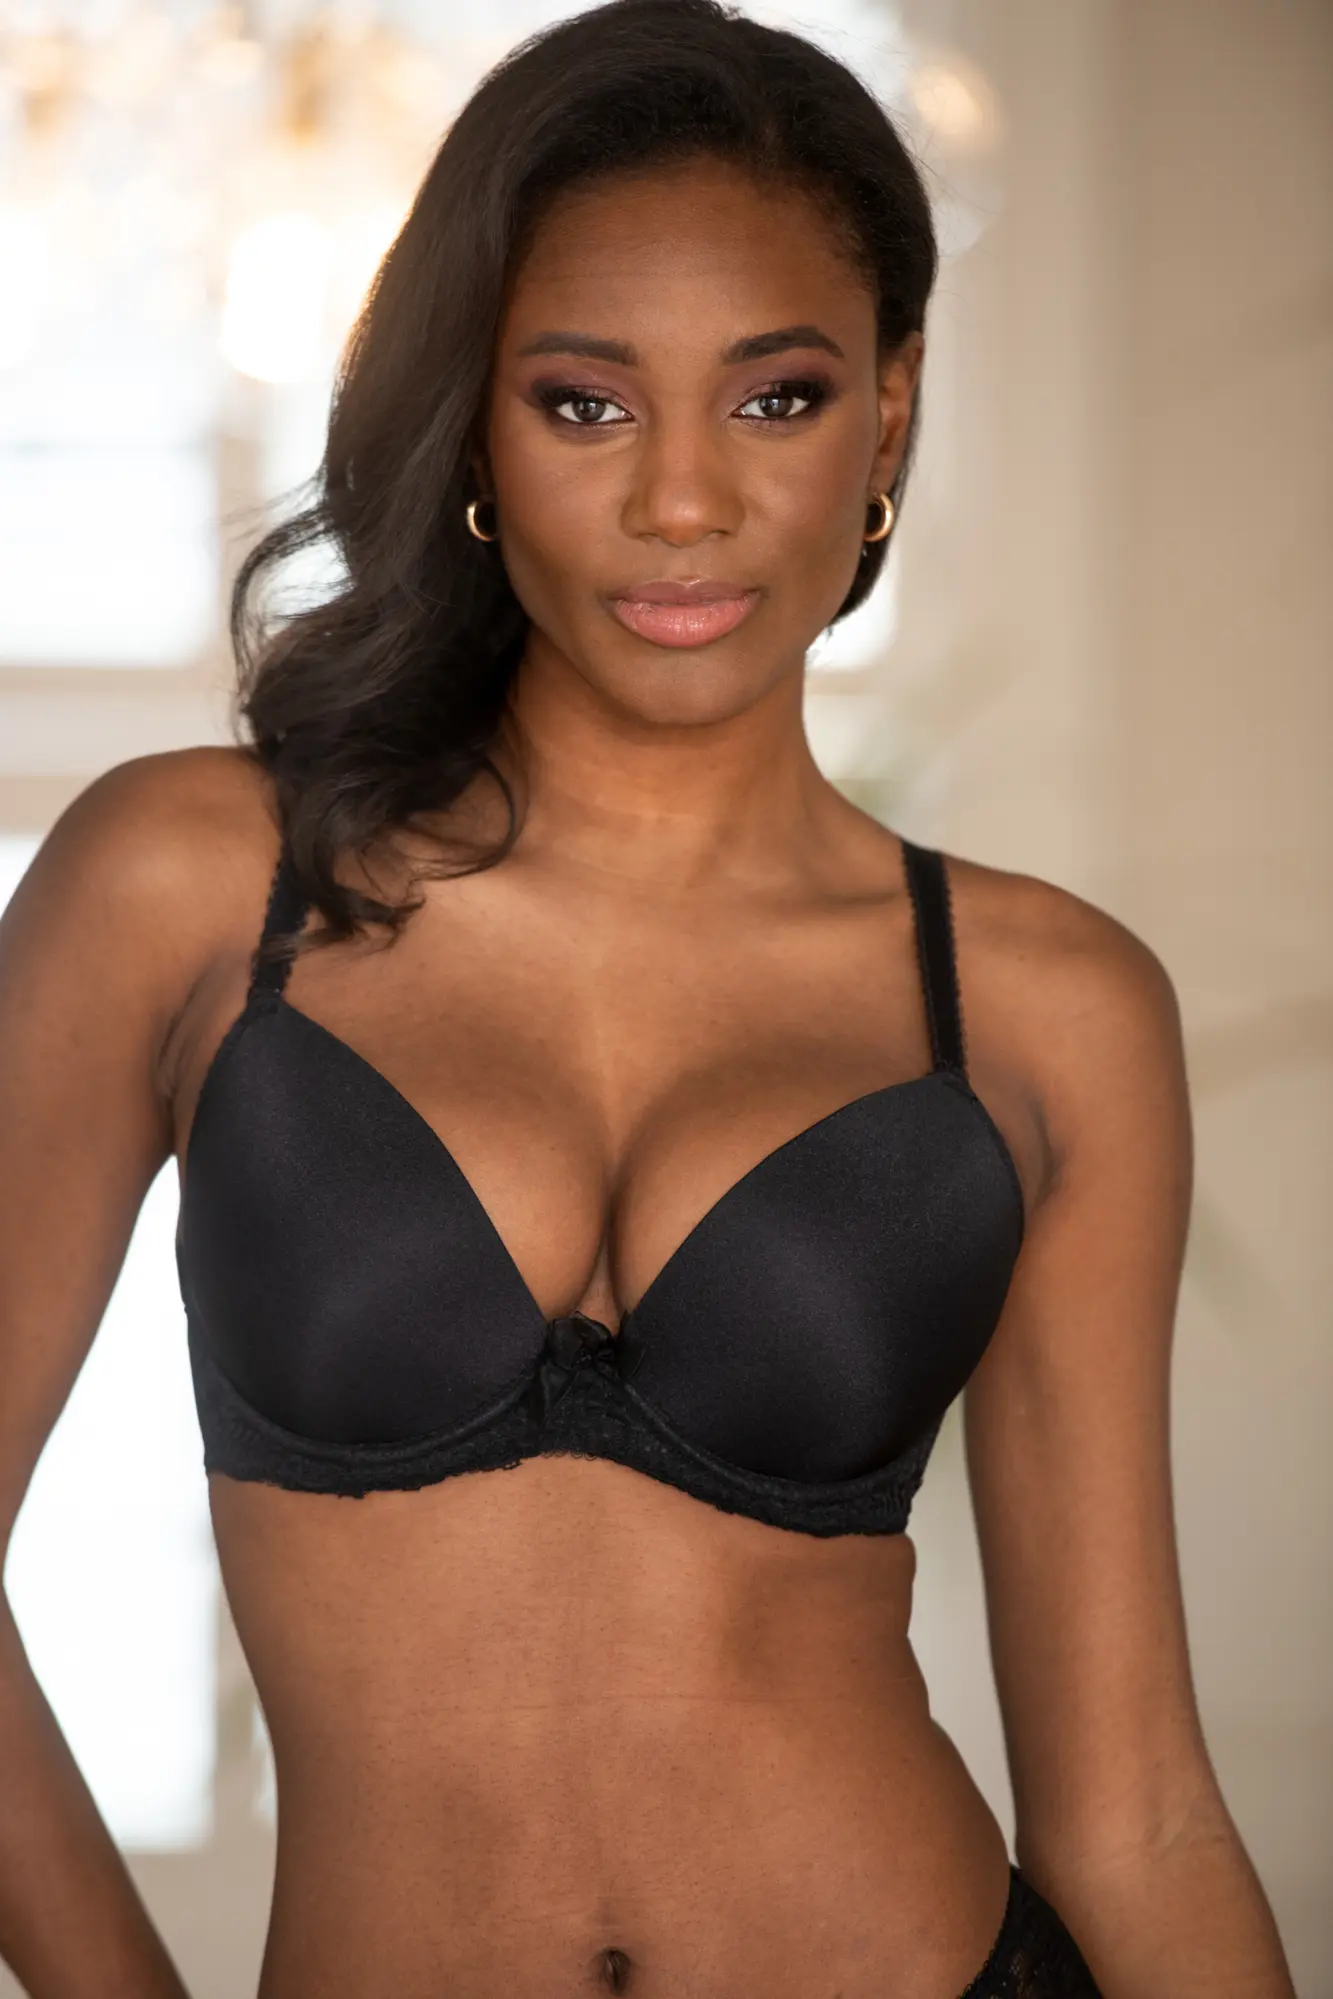 Are you wearing the right bra size? Find out with our six tips